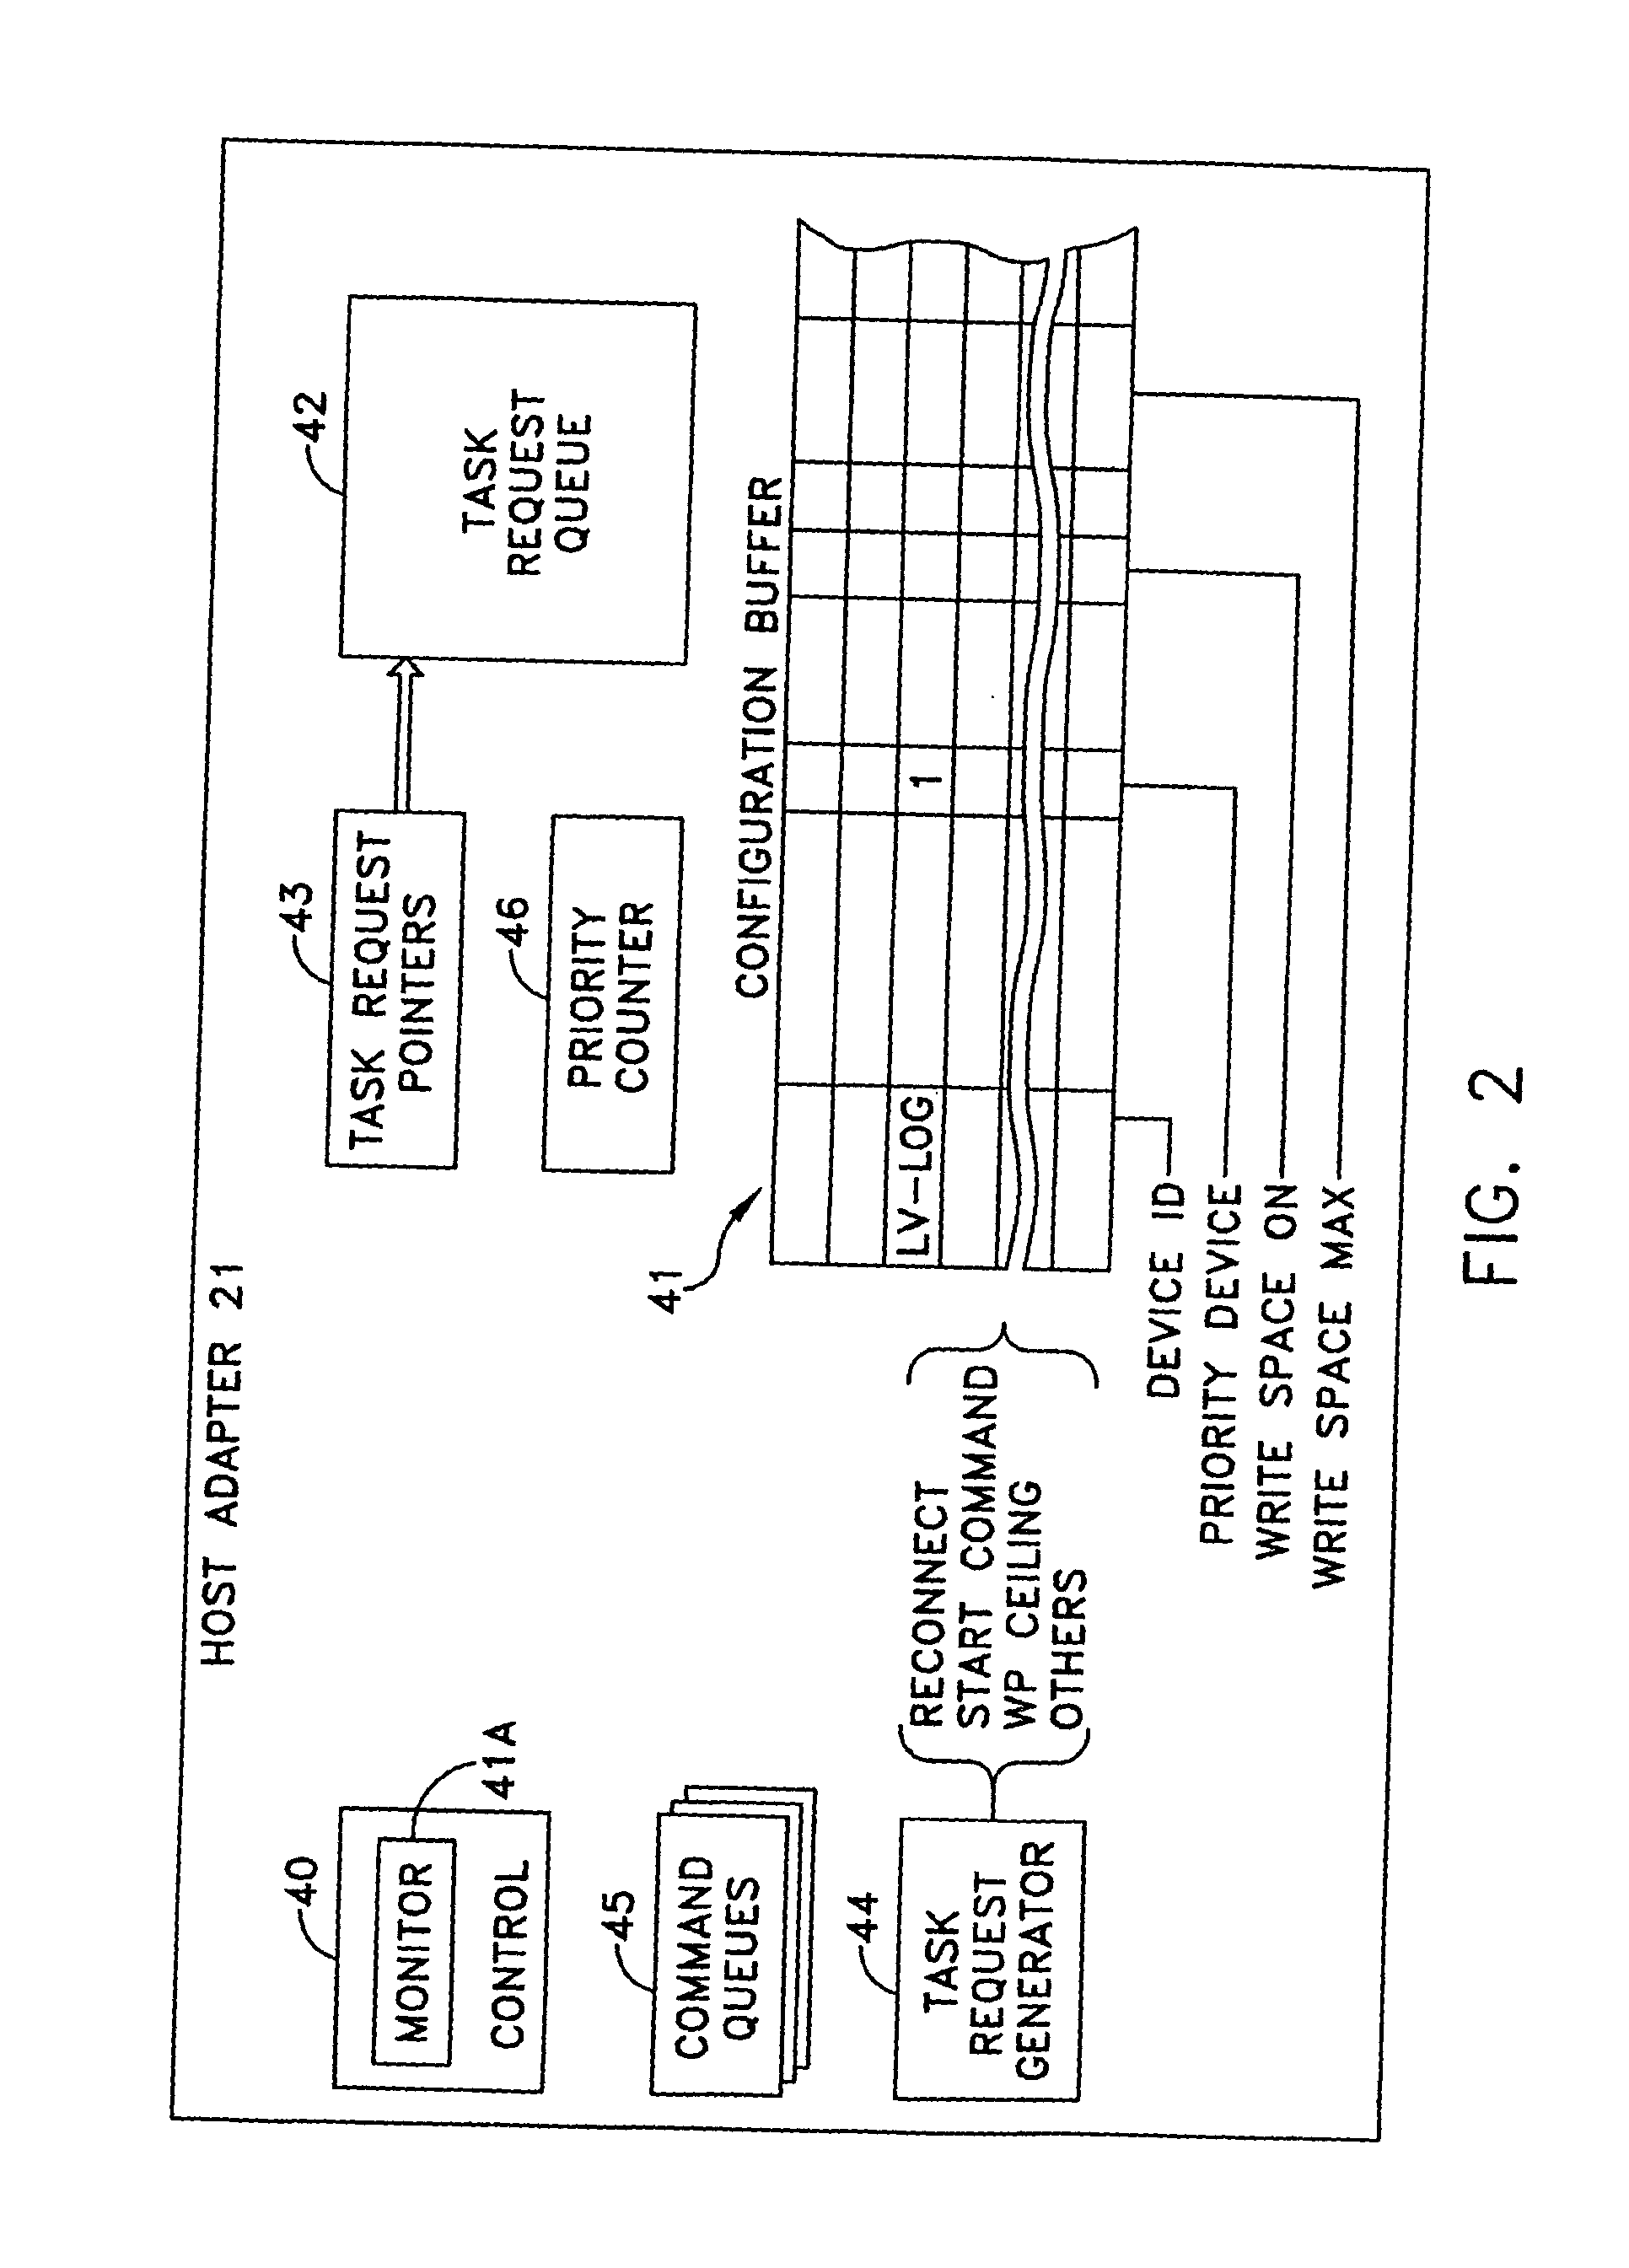 Disk array storage device with means for enhancing host application performance using task priorities